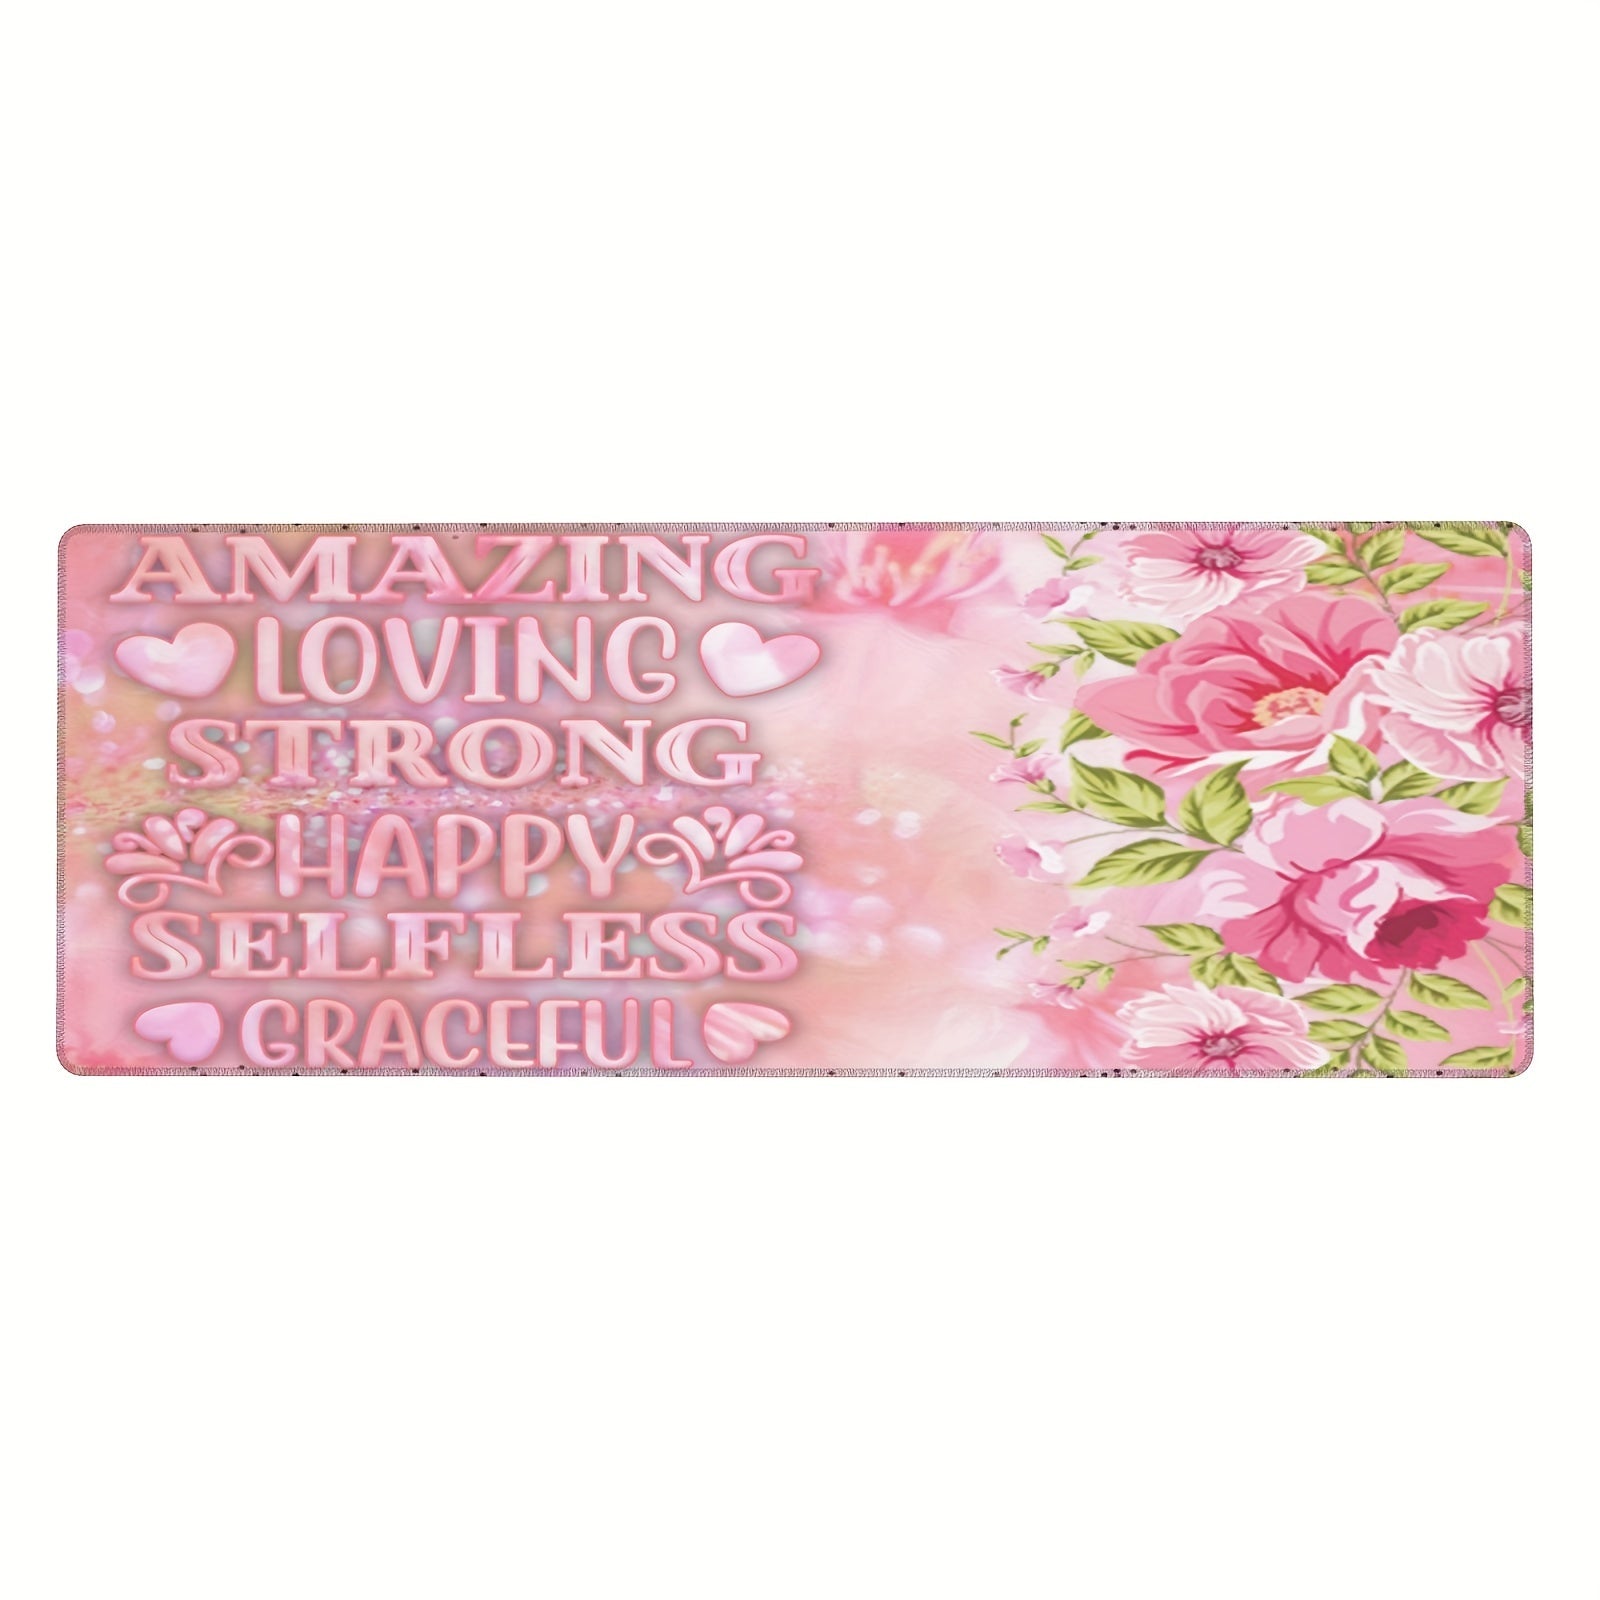 1pc Amazing Loving Strong Happy Selfless Graceful Christian Computer Keyboard/Mouse Pad claimedbygoddesigns